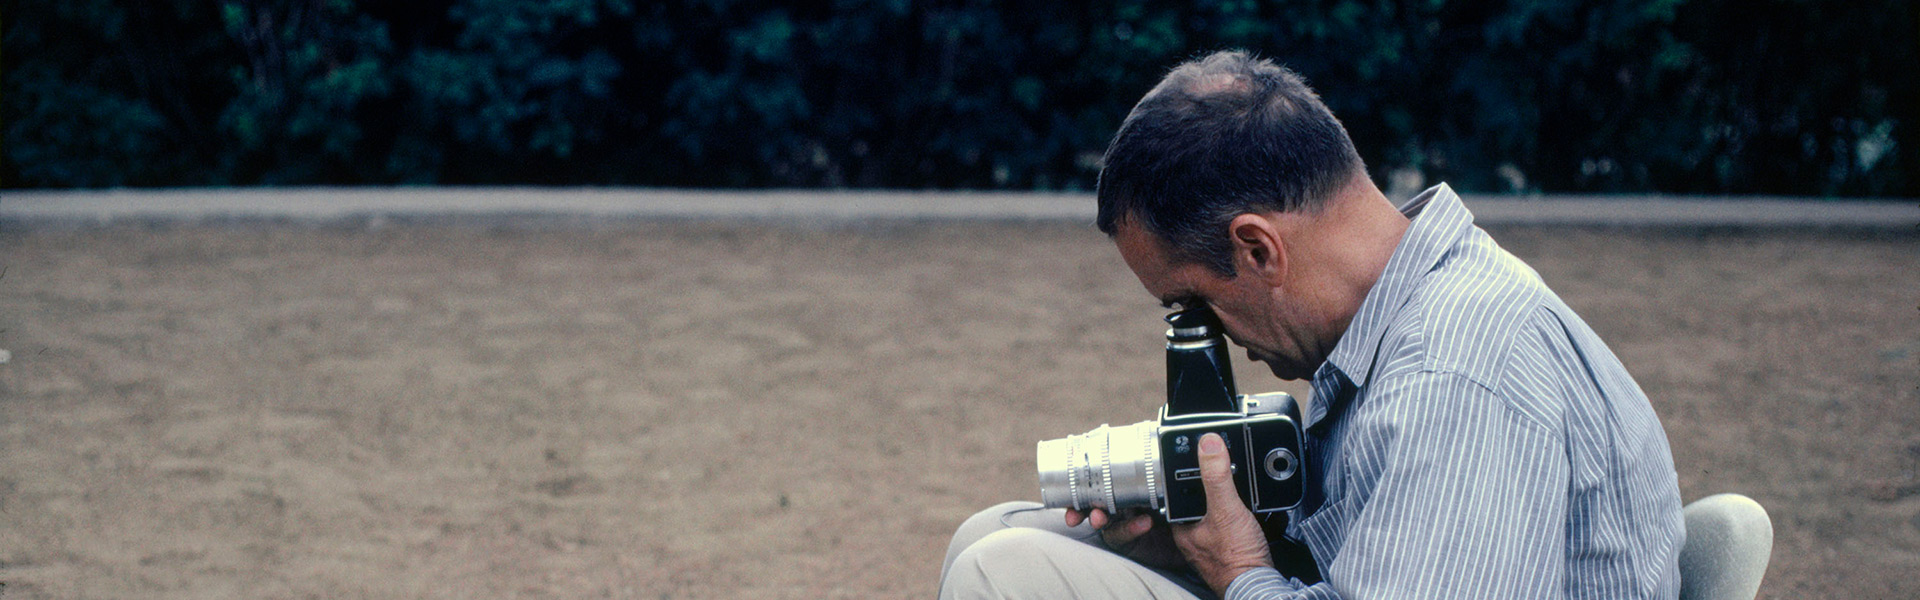 Charles Eames sits on one of his chairs and takes a photo with a Hasselblad camera